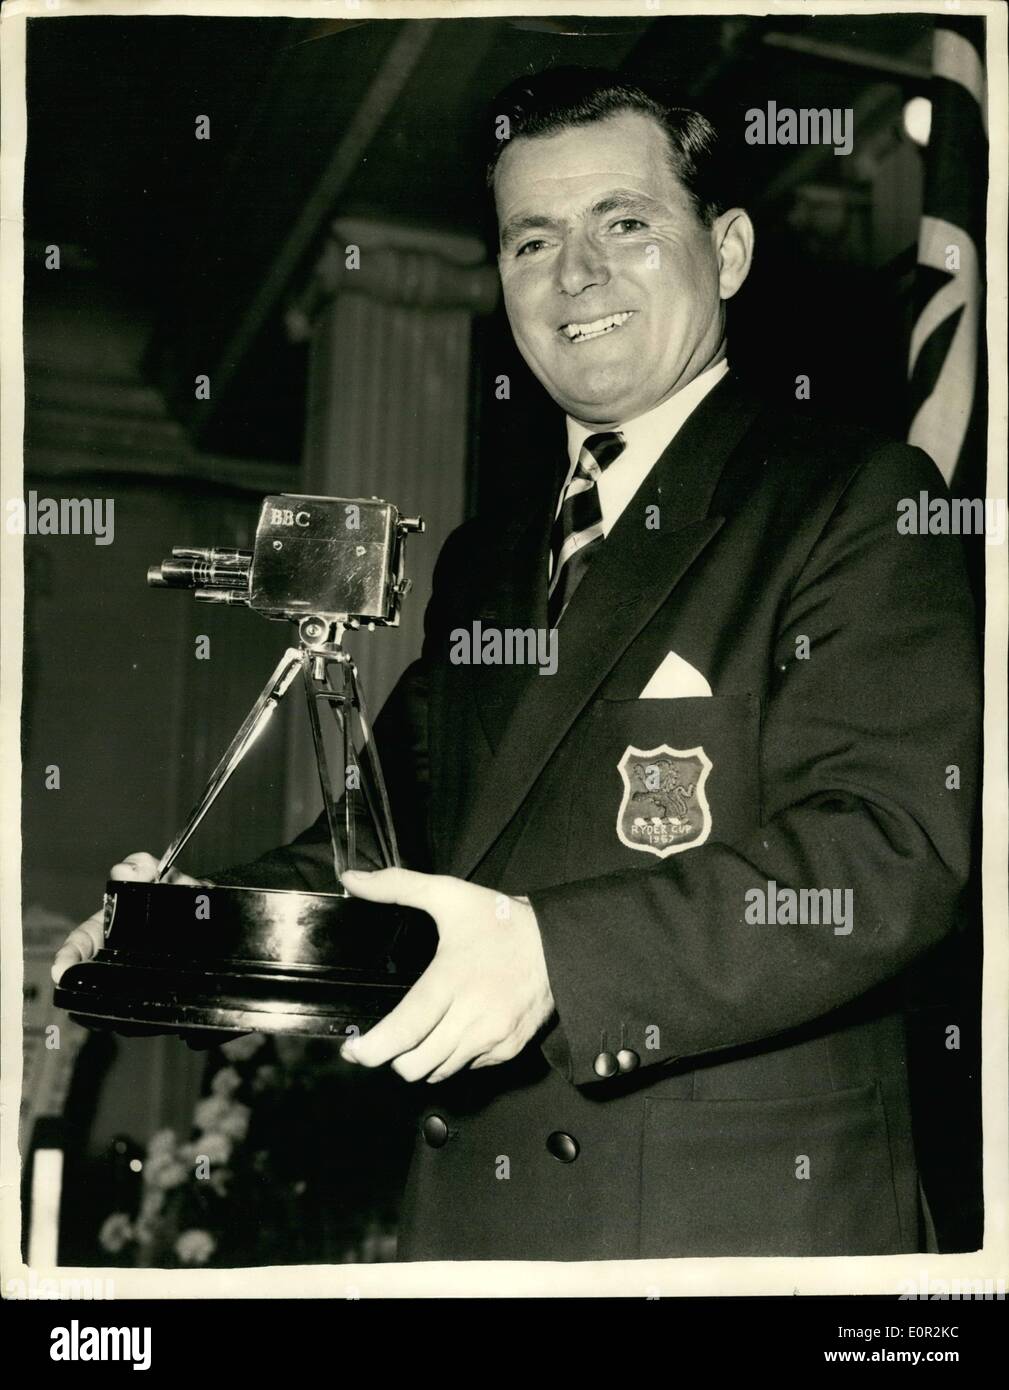 Dec. 12, 1957 - Dai Rees acclaimed B.B.C. ''Sports view personality'' of the year.: Last night millions of TV viewers saw Dai Rees, the golfer, was acclaimed the B.B.C. ''Sportsview Personality of the Year'' in one of the greatest-ever sports parades assembled at the Grosvenor House. Photo shows Dai Rees pictured with his trophy after the presentation last night. Stock Photo